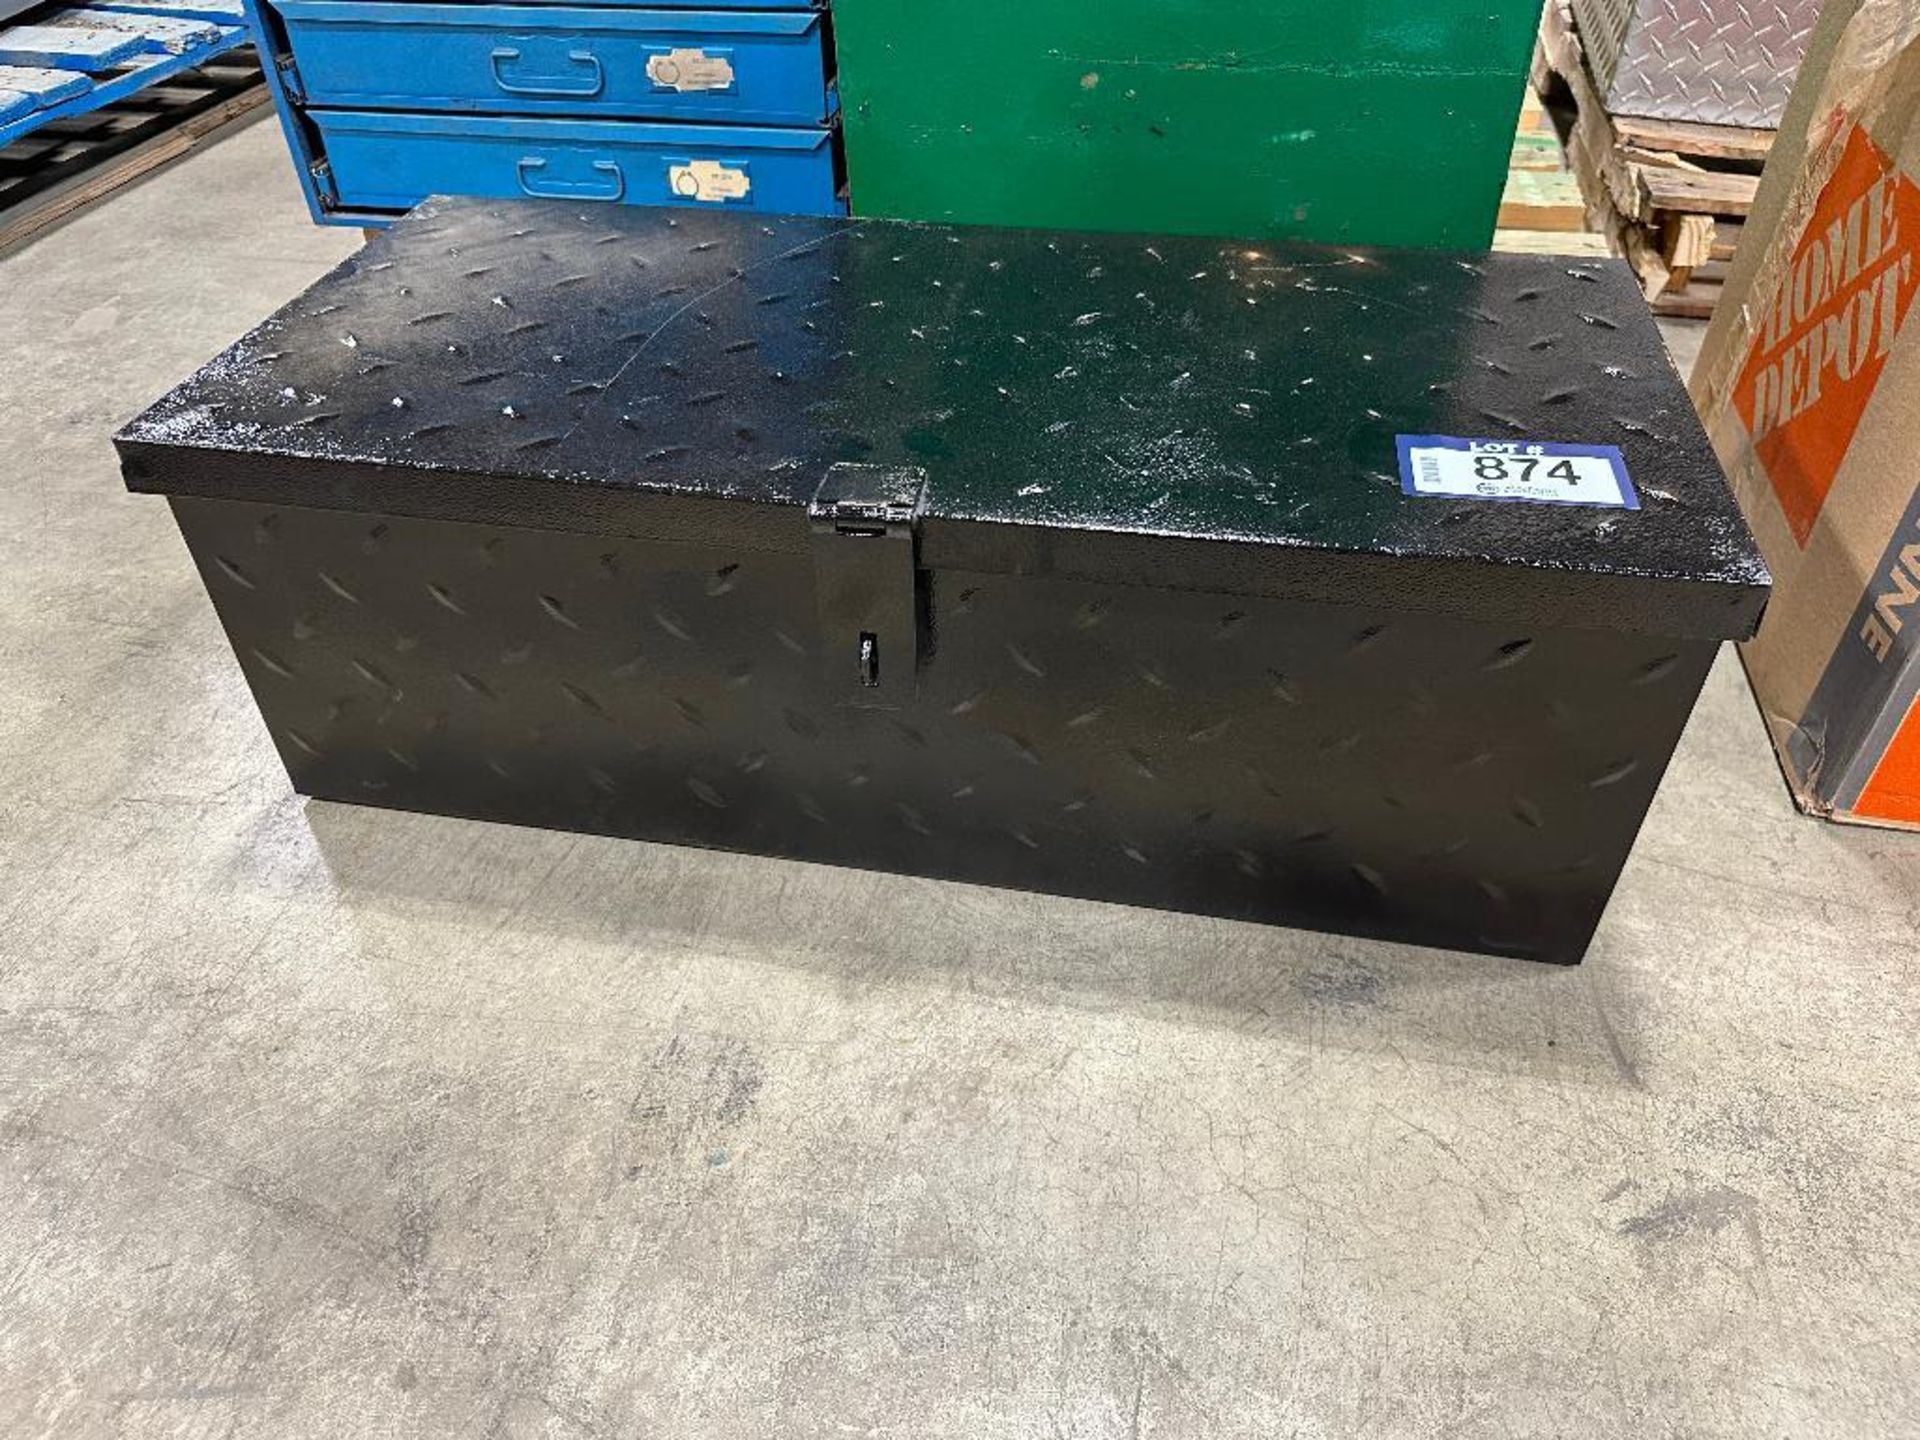 Approx. 30" X 15" X 10" Metal Tool Chest - Image 3 of 3